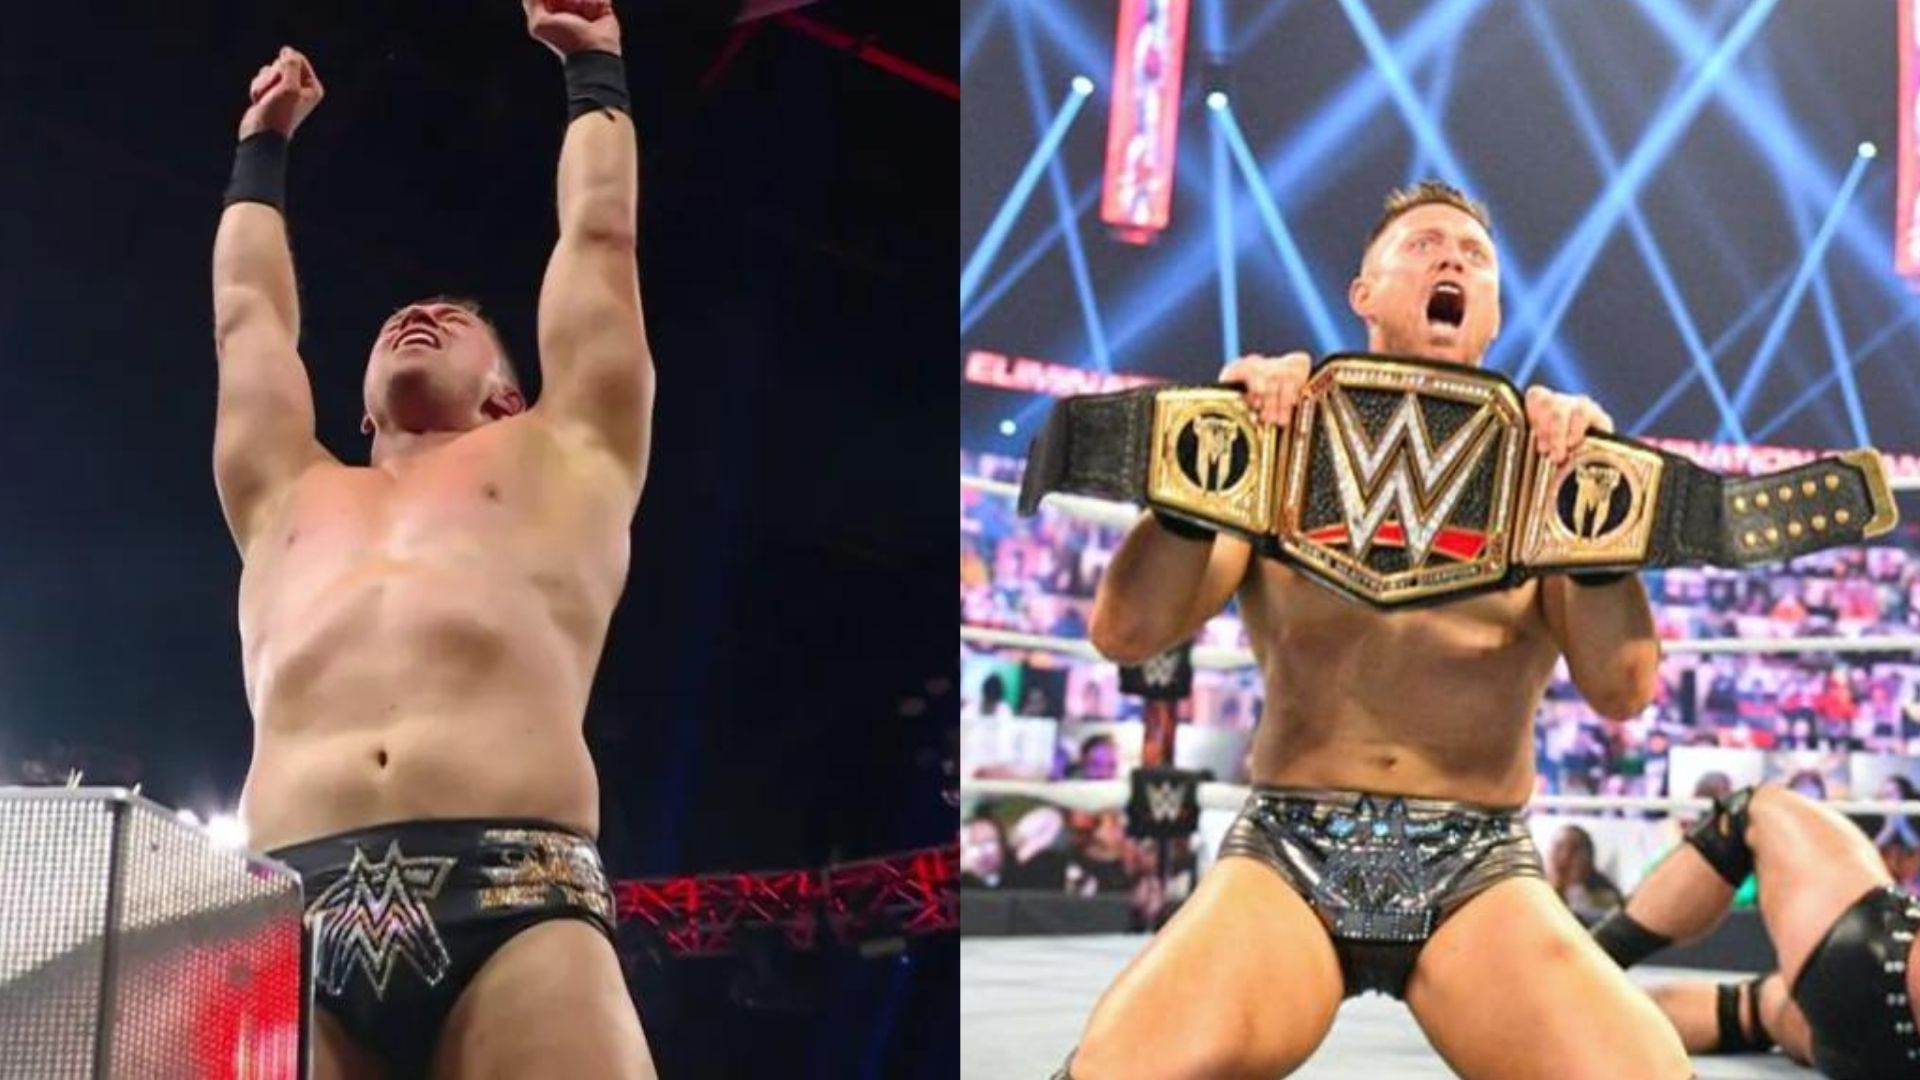 The Miz is the #1 contender for the Intercontinental Title